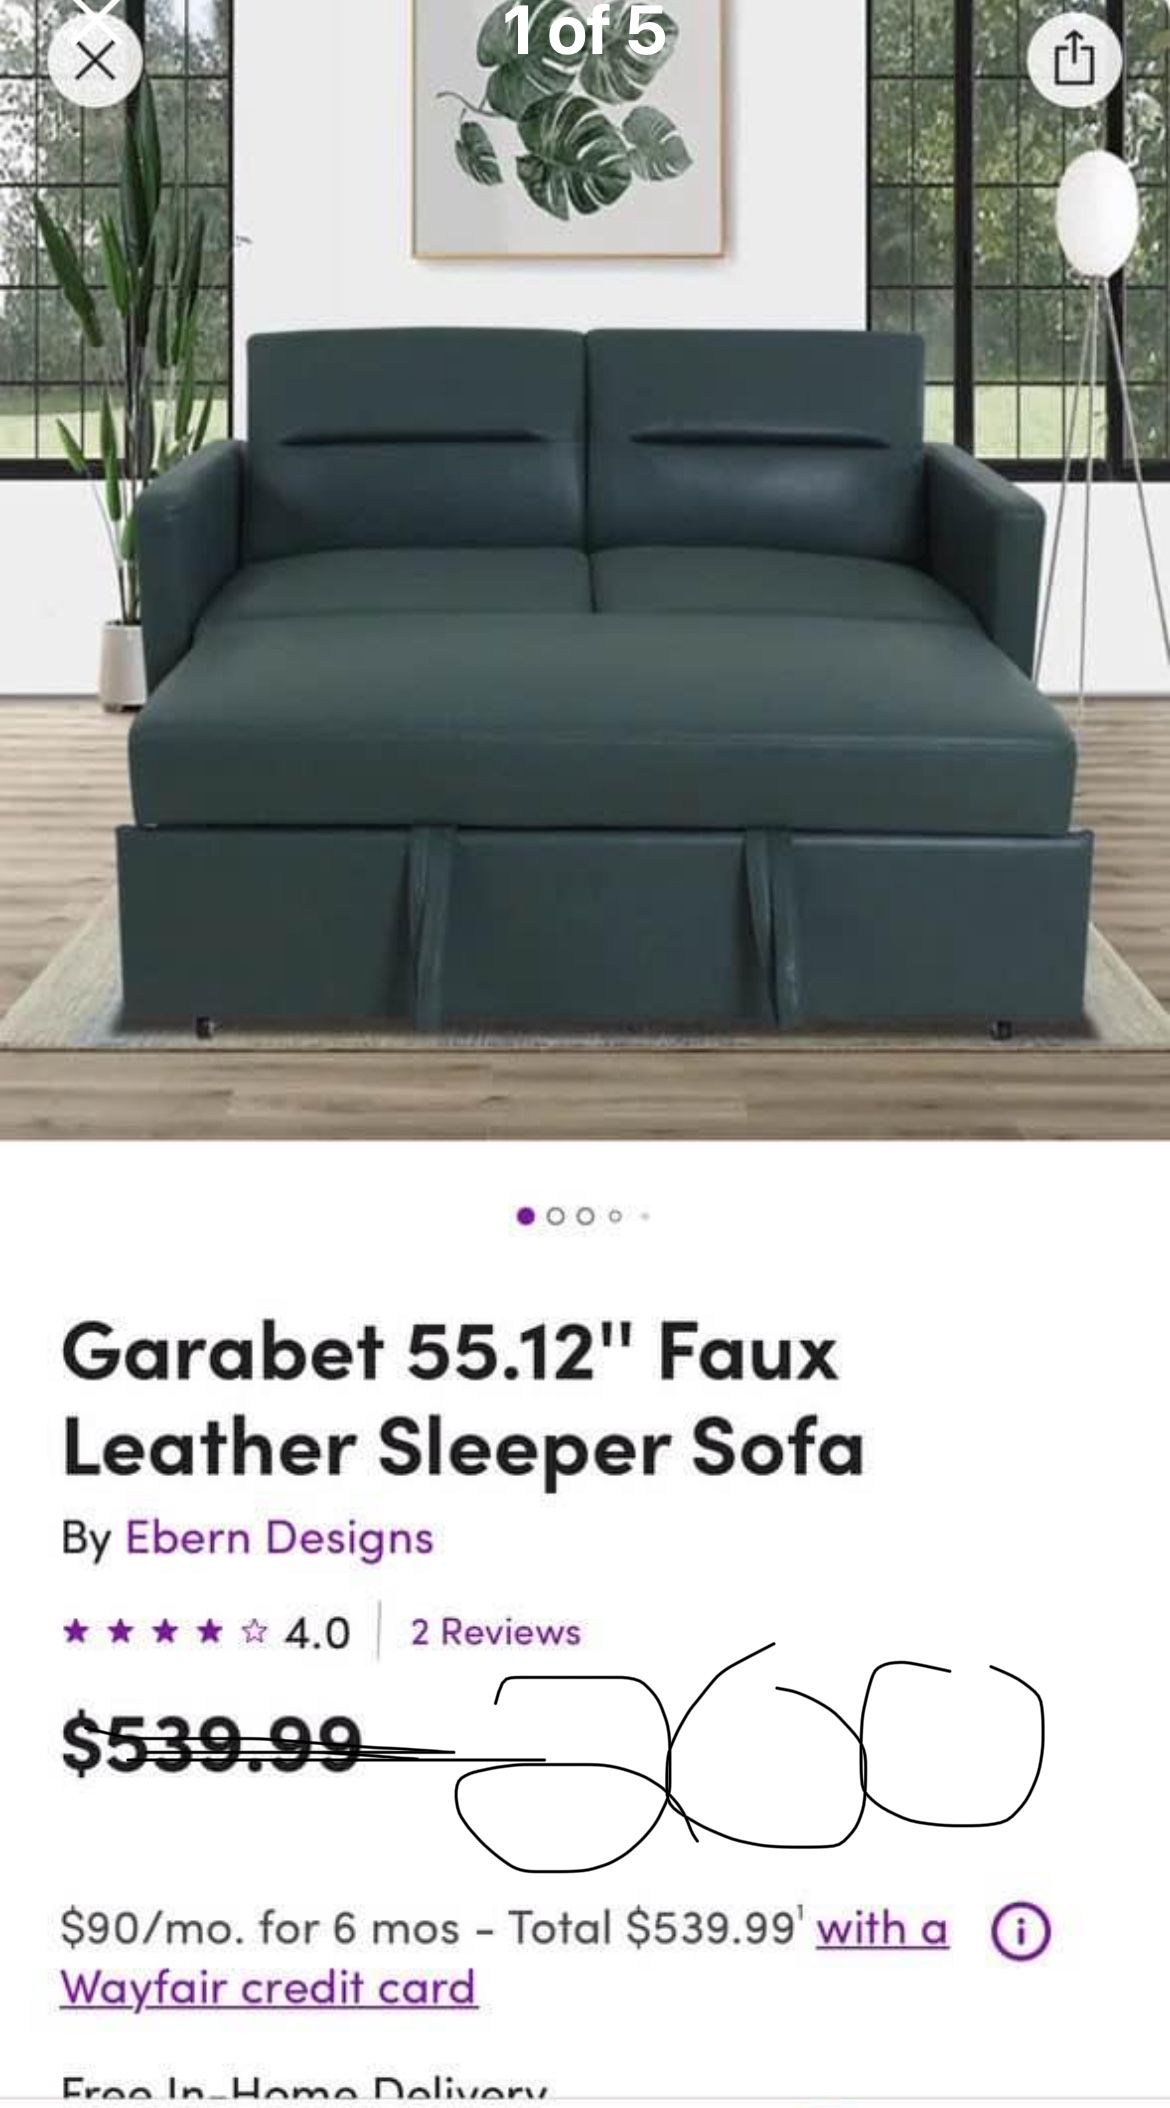 New, In Box, Sofa Bed